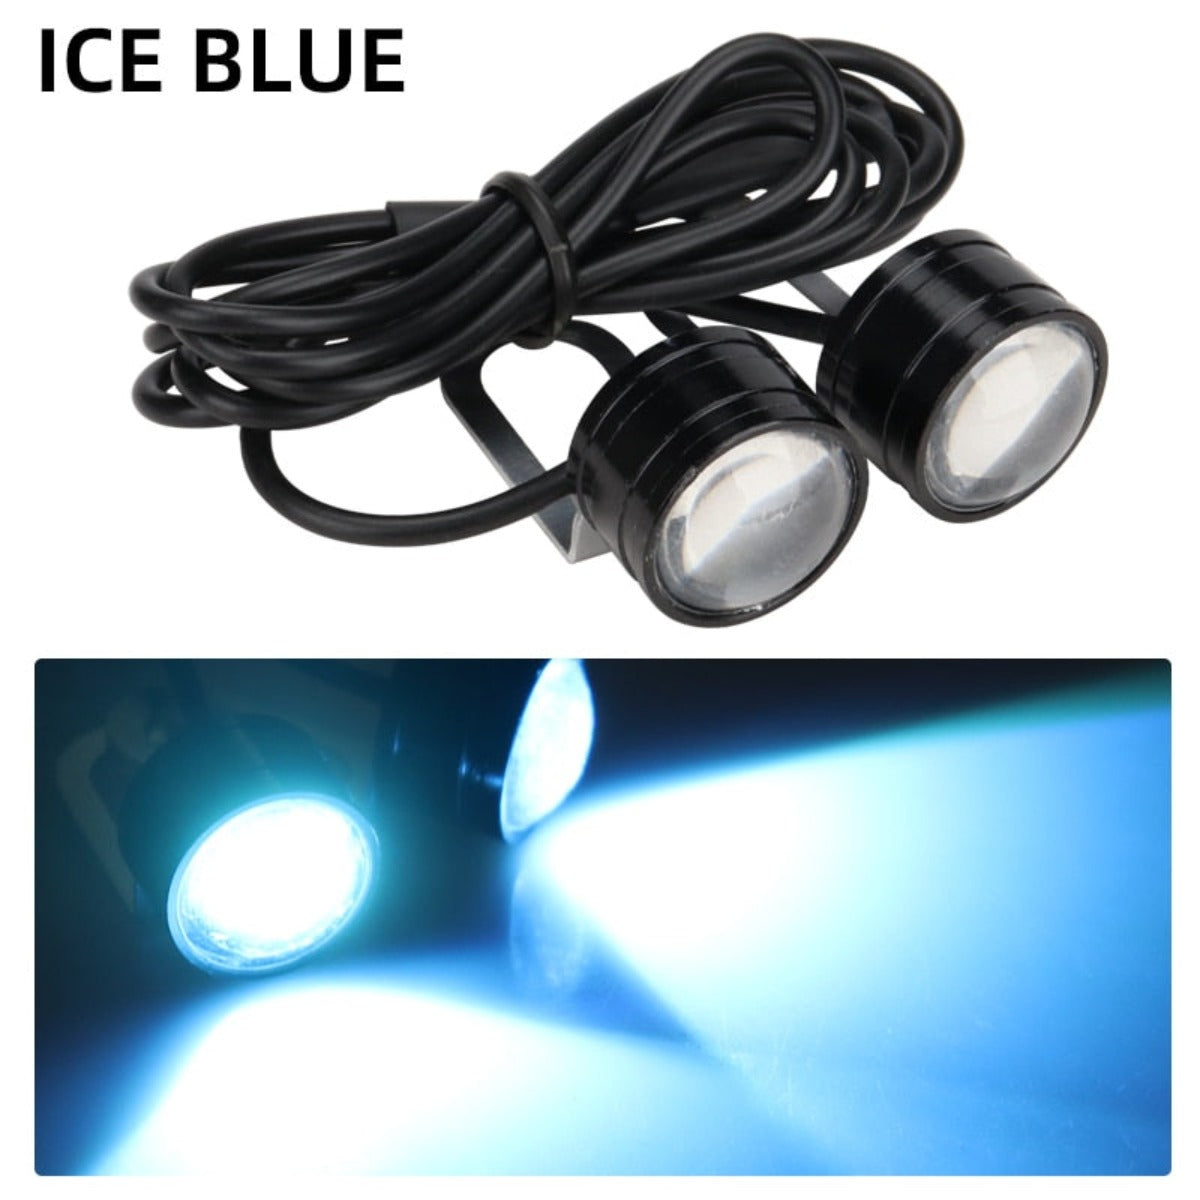 Enhance motorcycle safety with Motorcycle Strobe LED Driving Lights that offer superior visibility.